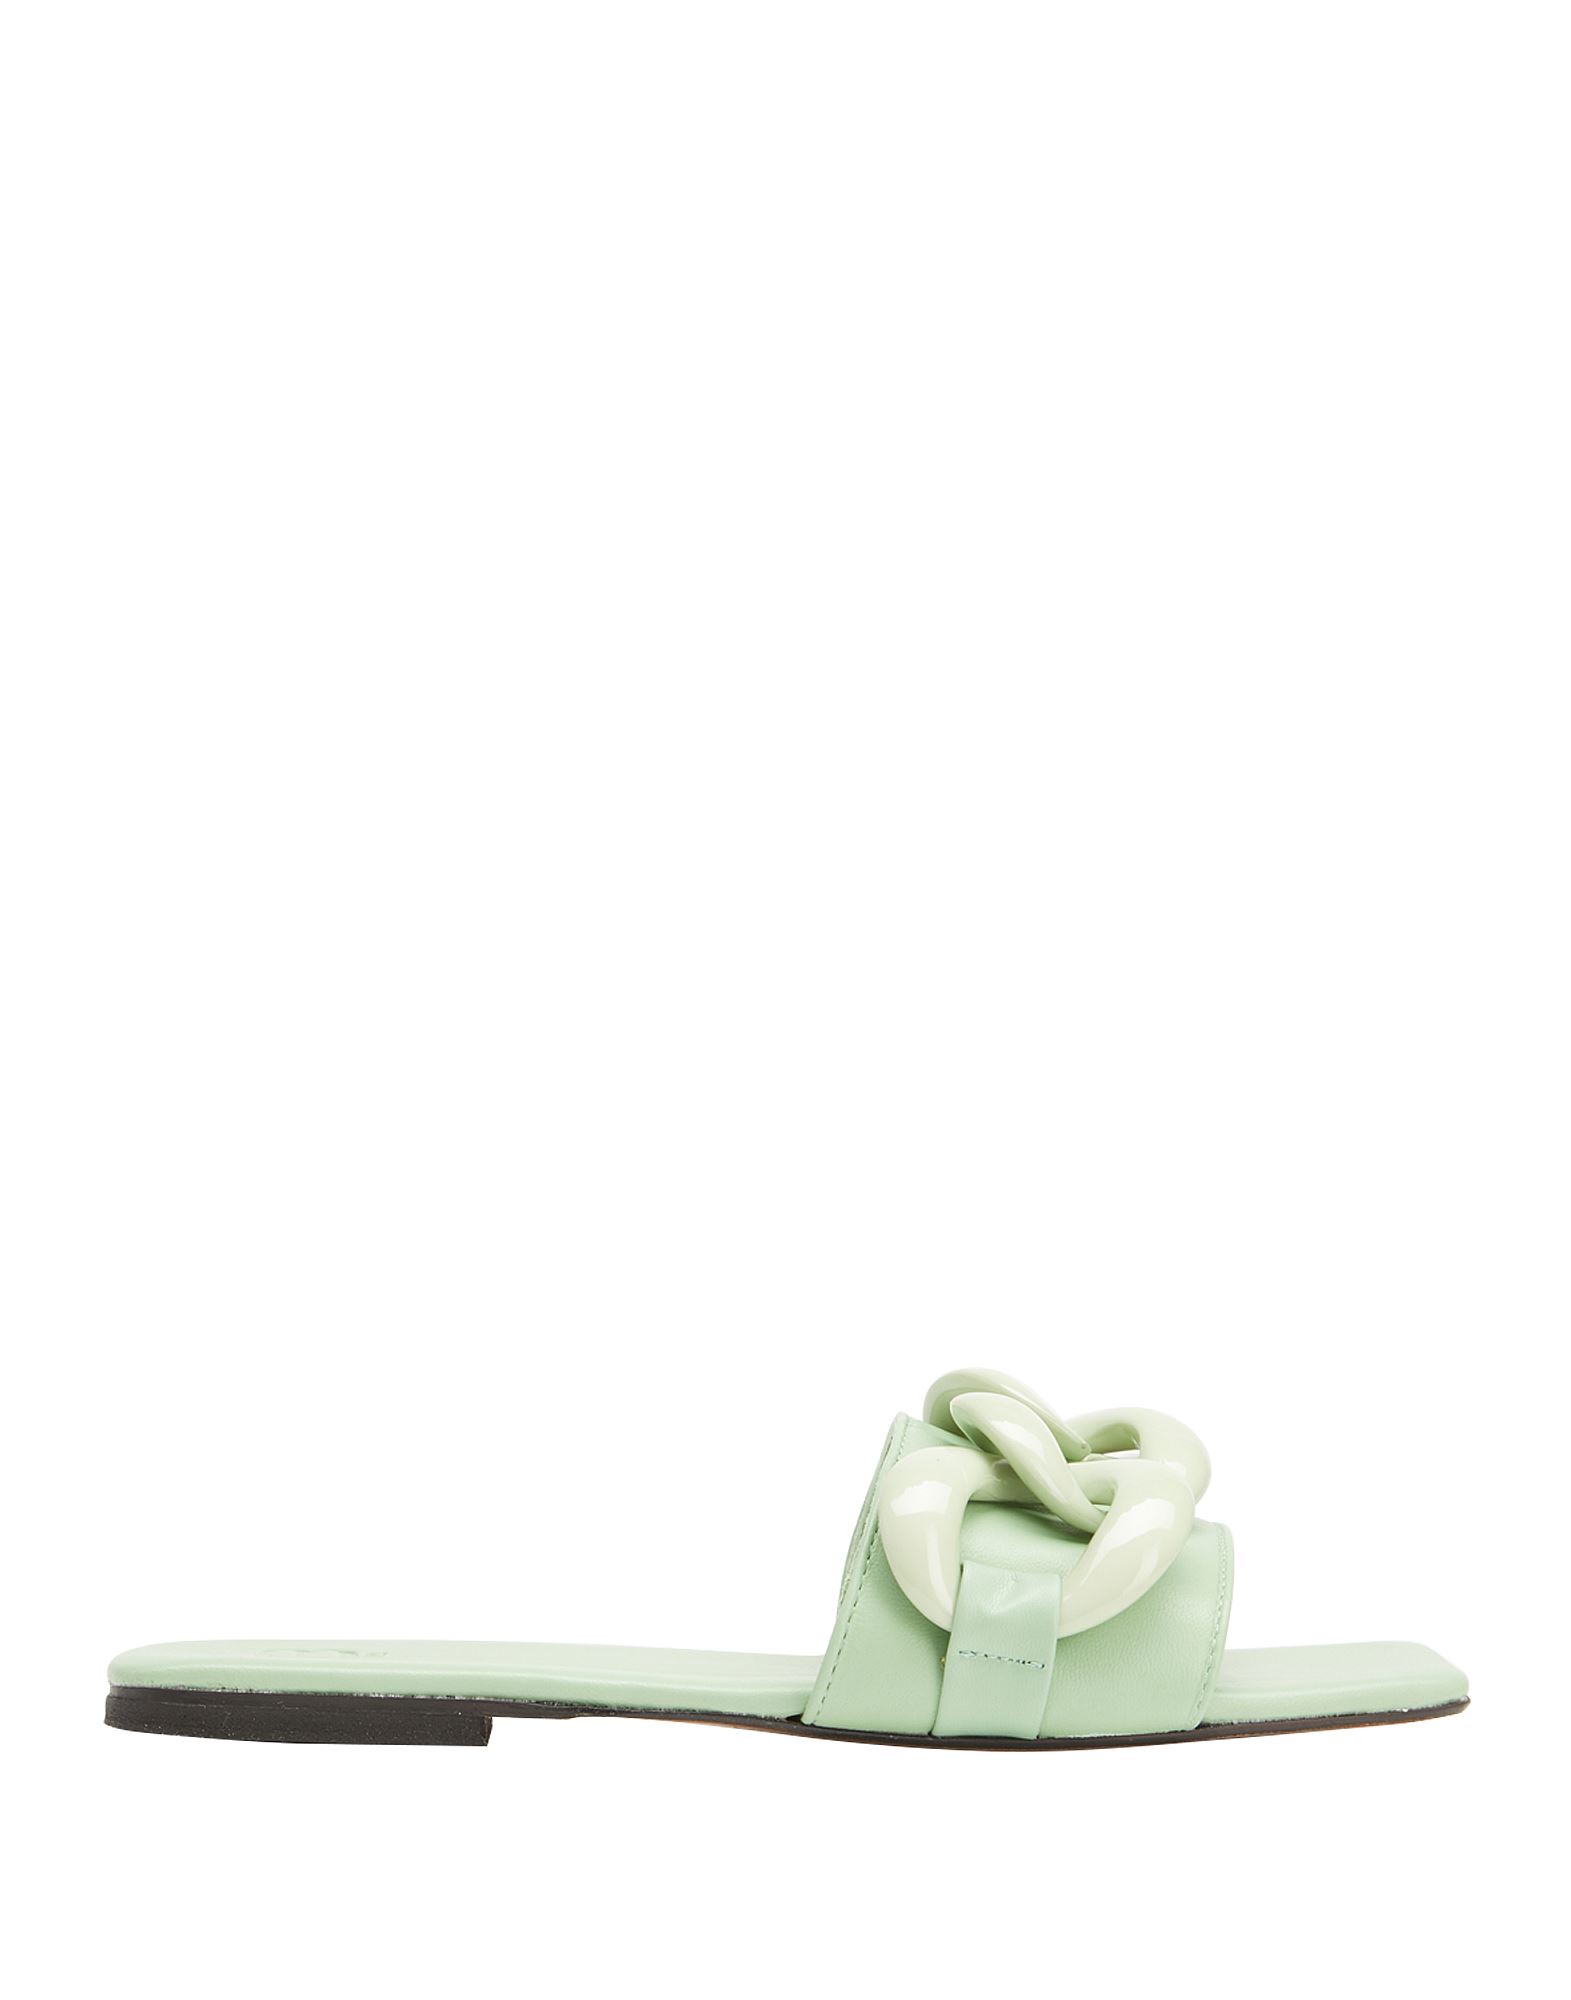 8 By Yoox Sandals In Sage Green